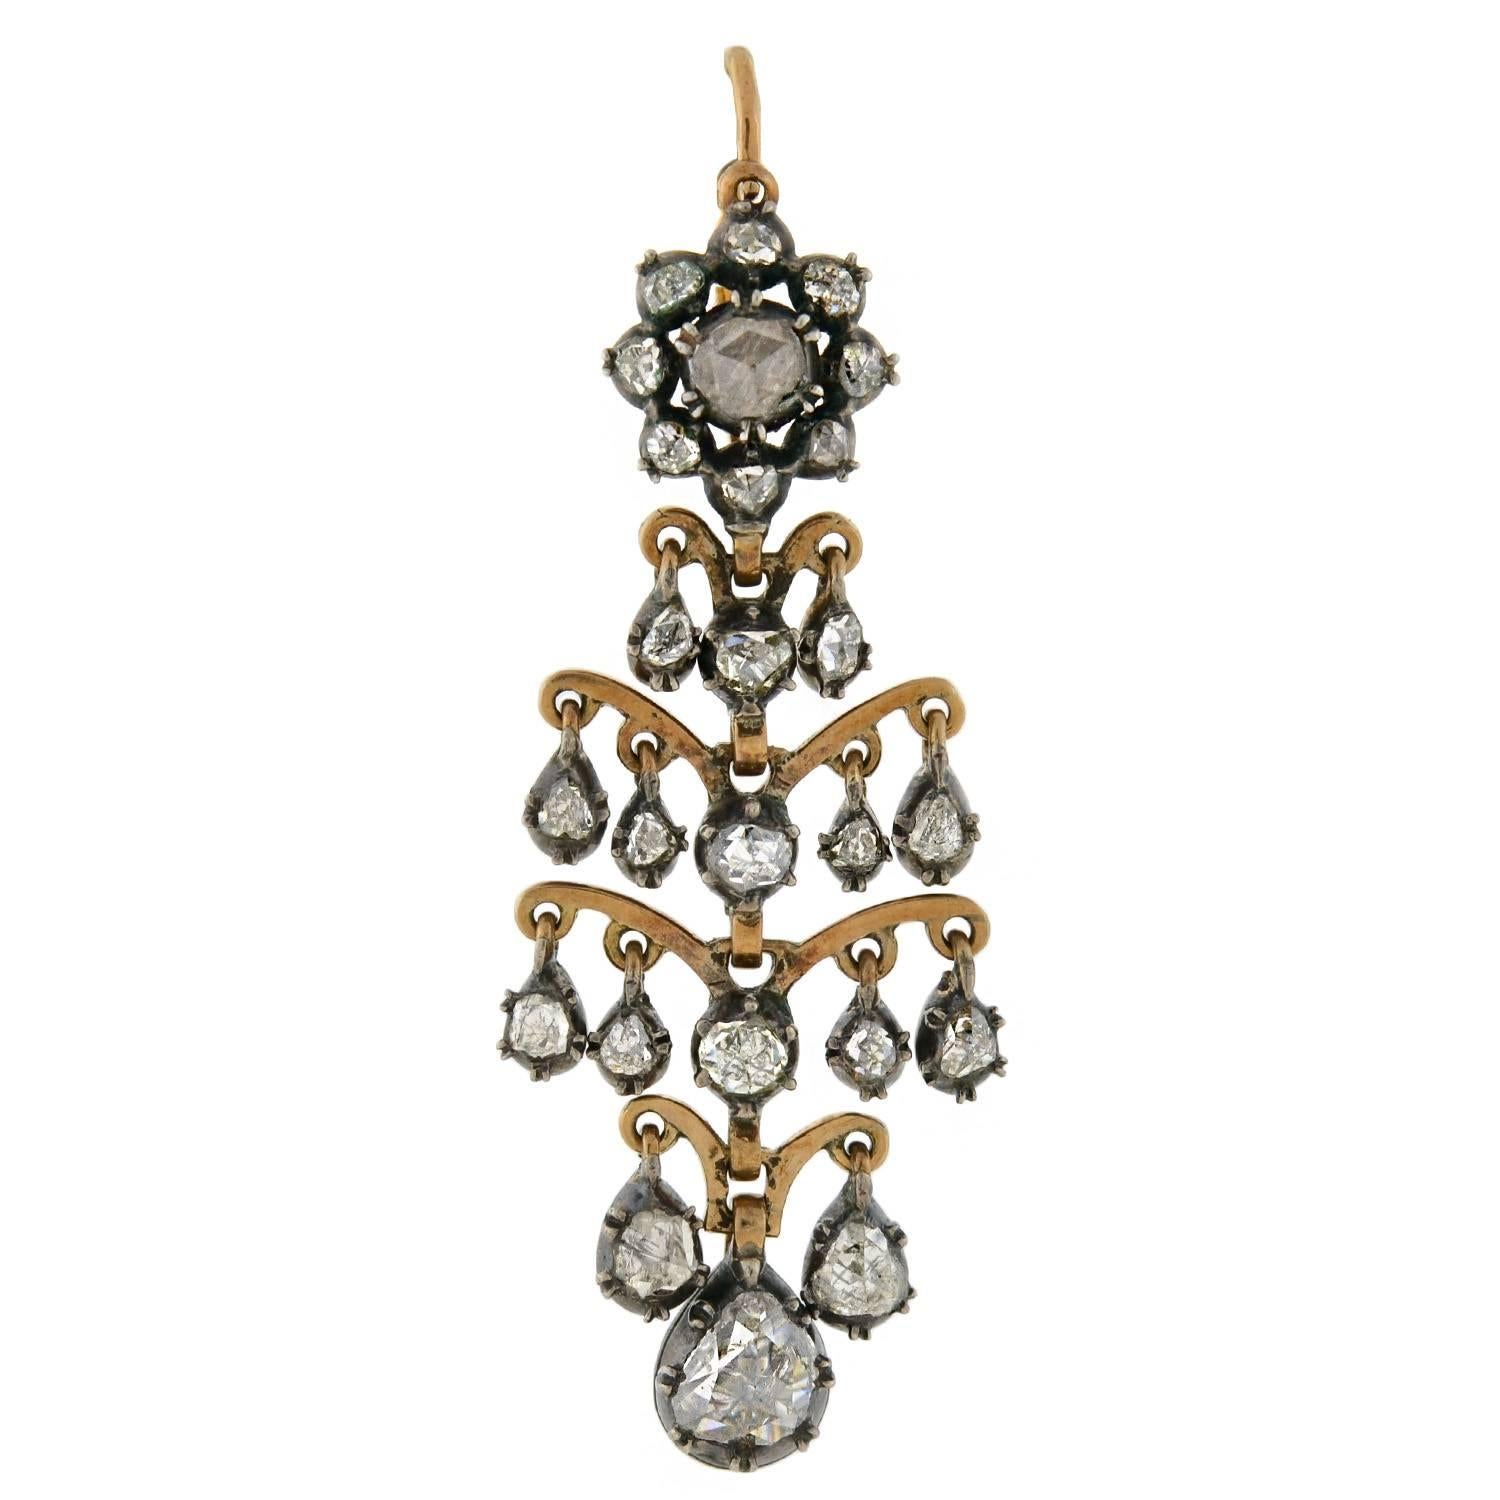 Exquisite Victorian (ca1880) Rose Cut diamond earrings! These incredible earrings are made of 18kt rosy yellow gold topped with sterling silver and are dripping with sparkling old Rose Cut diamond stones. Each earring begins with a single belcher